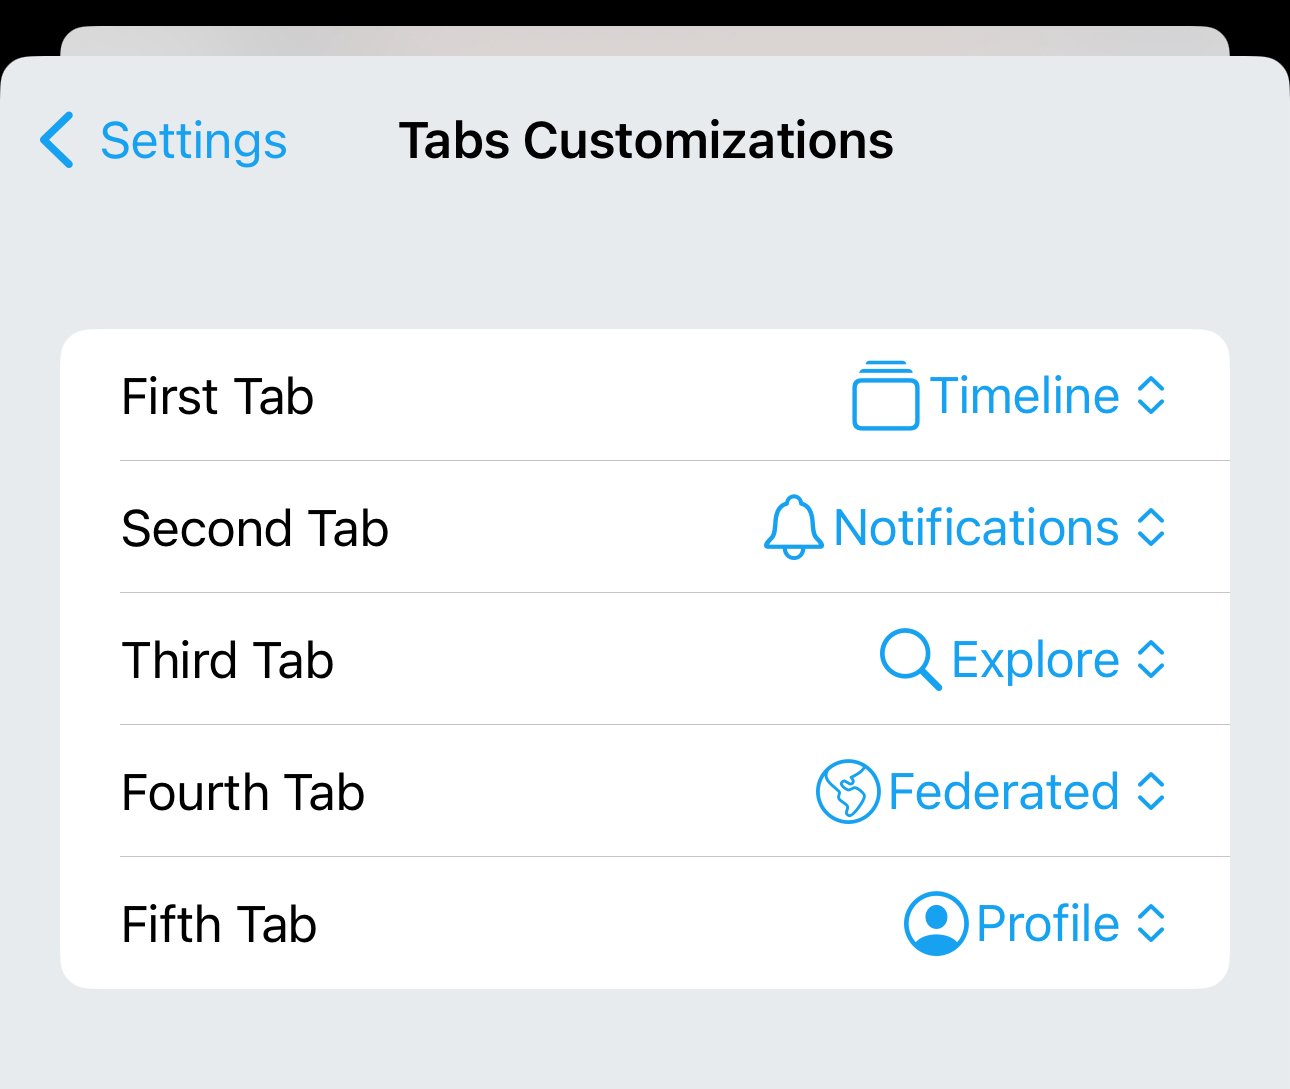 Screen capture of a “Tabs Customizations” menu within a settings interface displaying options to assign different functions to five tabs: First Tab (Timeline), Second Tab (Notifications), Third Tab (Explore), Fourth Tab (Federated), Fifth Tab (Profile